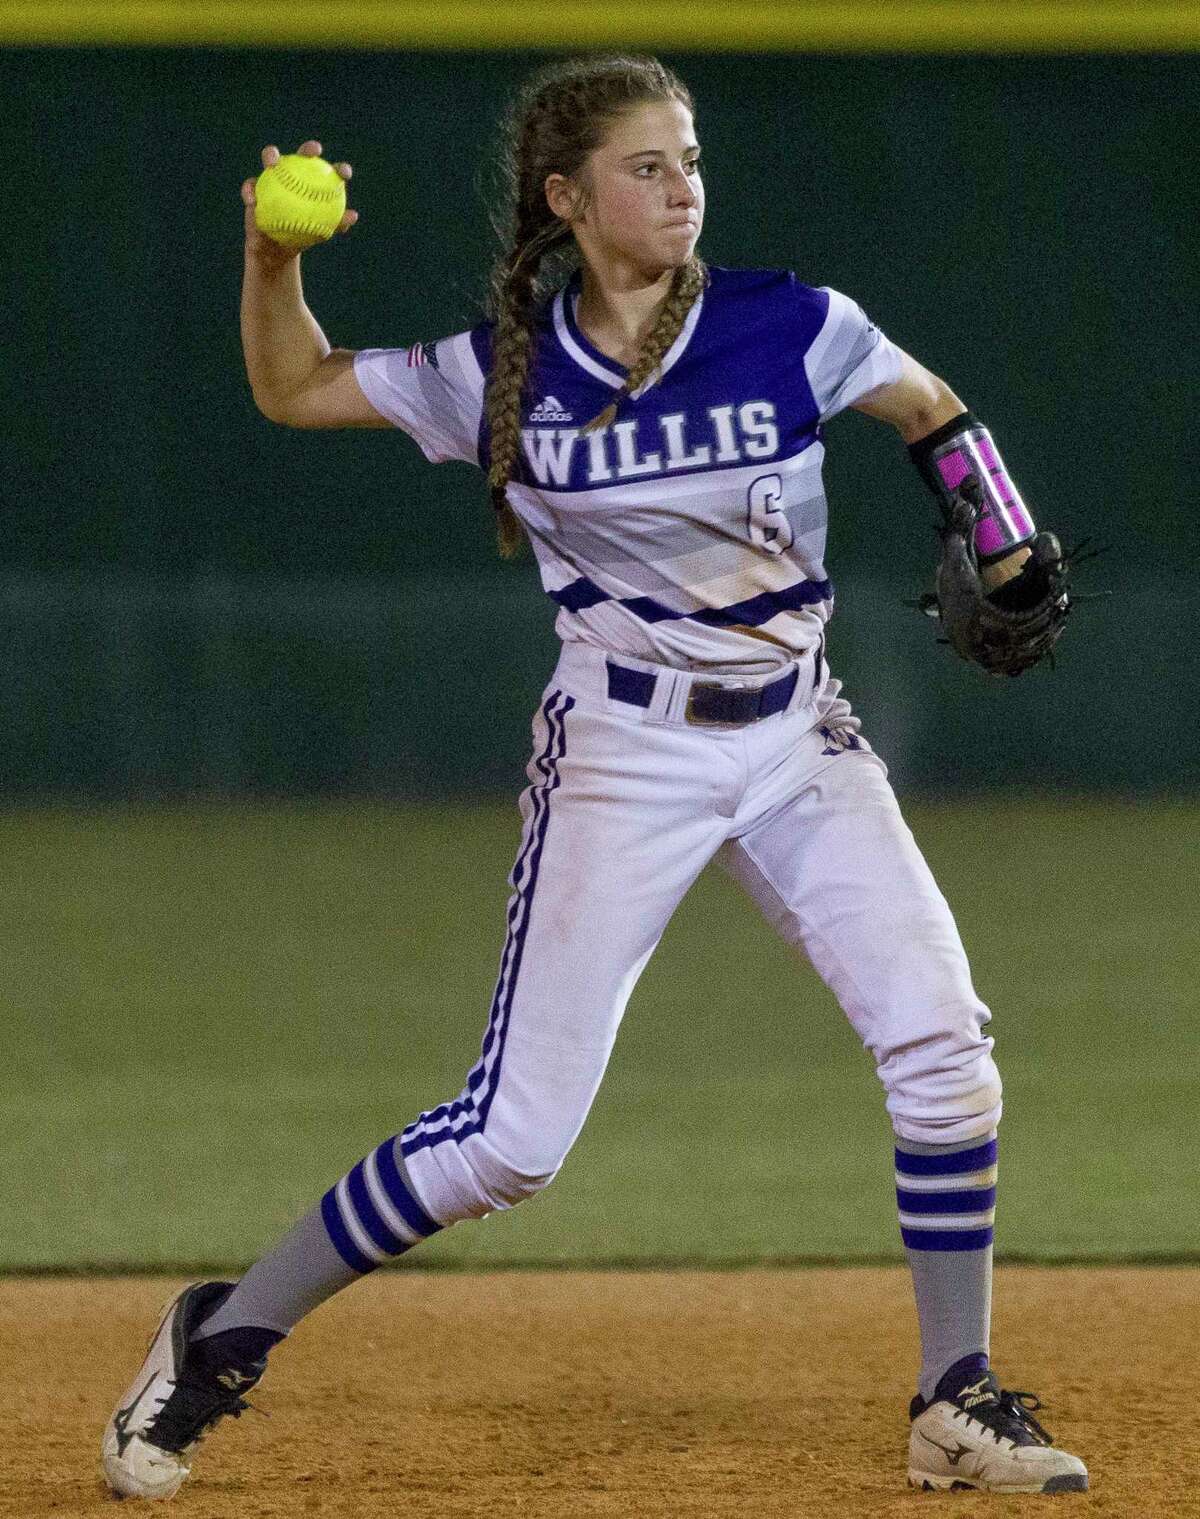 Willis second baseman Hannah Earls (6) throws out Ronnie Grofman #9 of Kingwood Park during the fifth inning in Game 3 of a Region III-5A semifinal series Friday, May 19, 2017, in Willis.